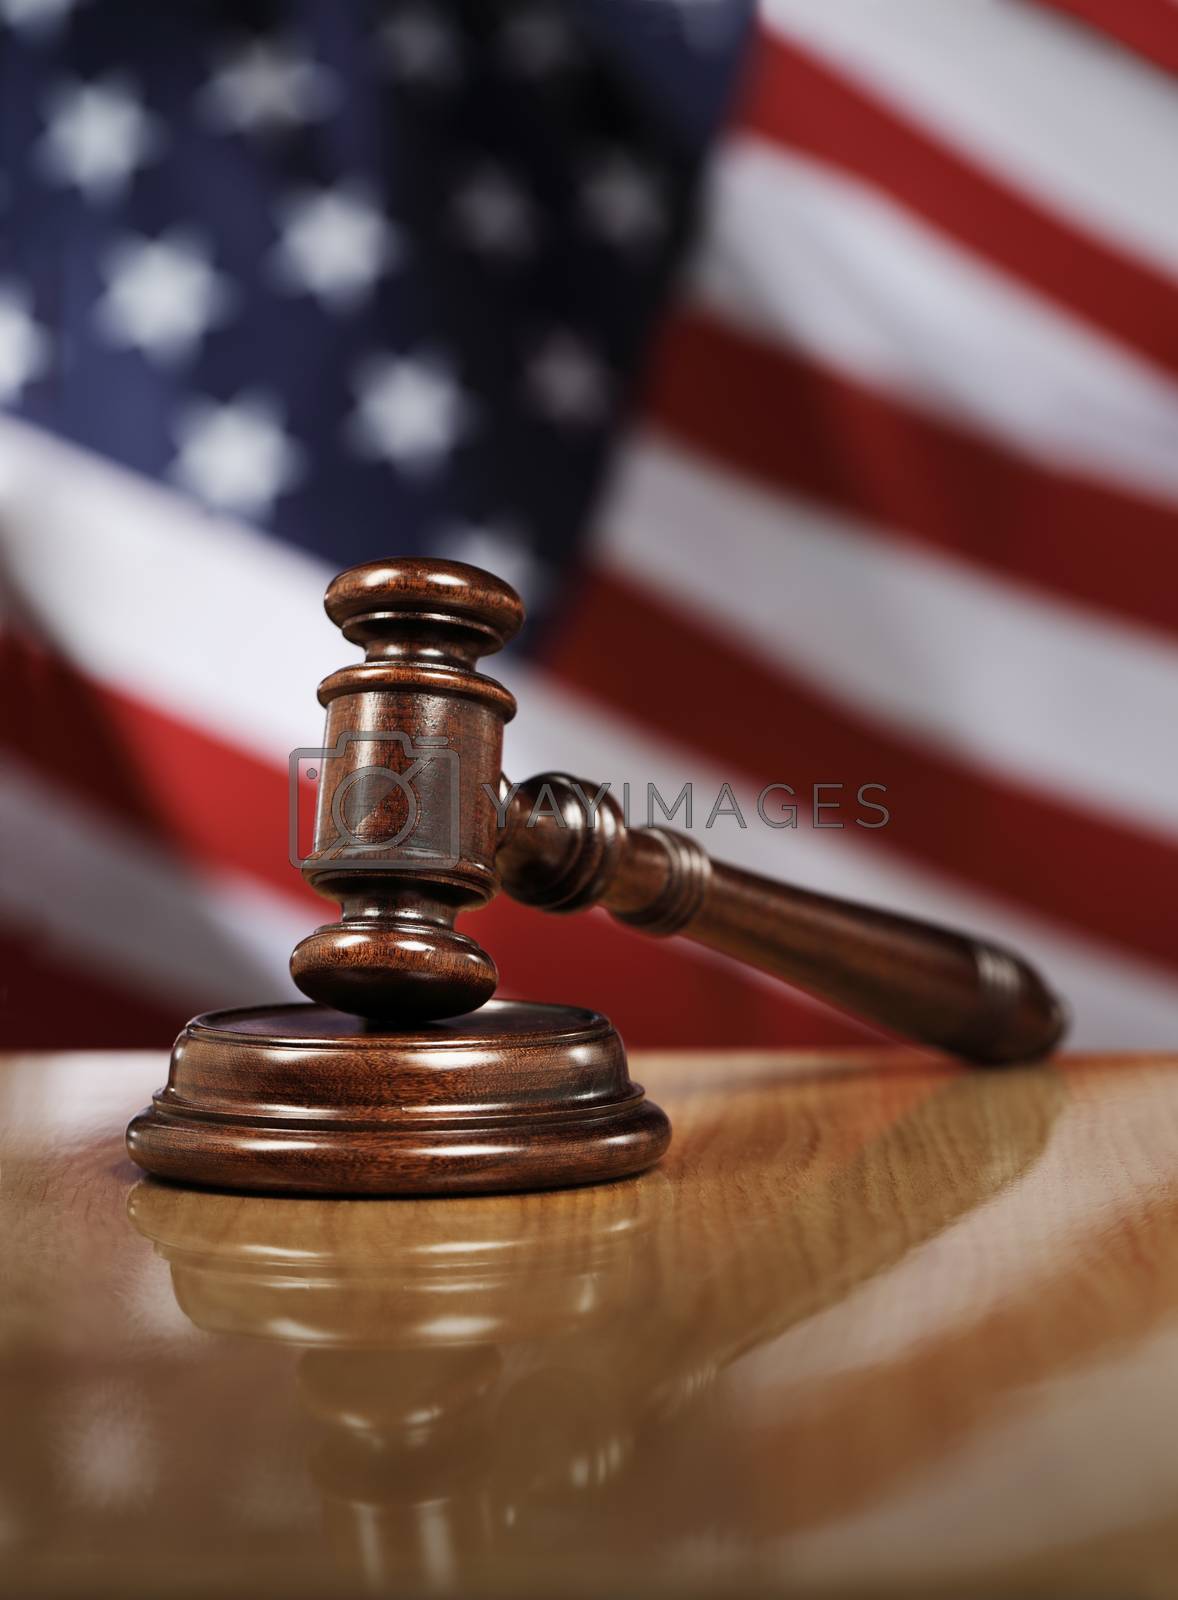 Royalty free image of United States Law by Stocksnapper